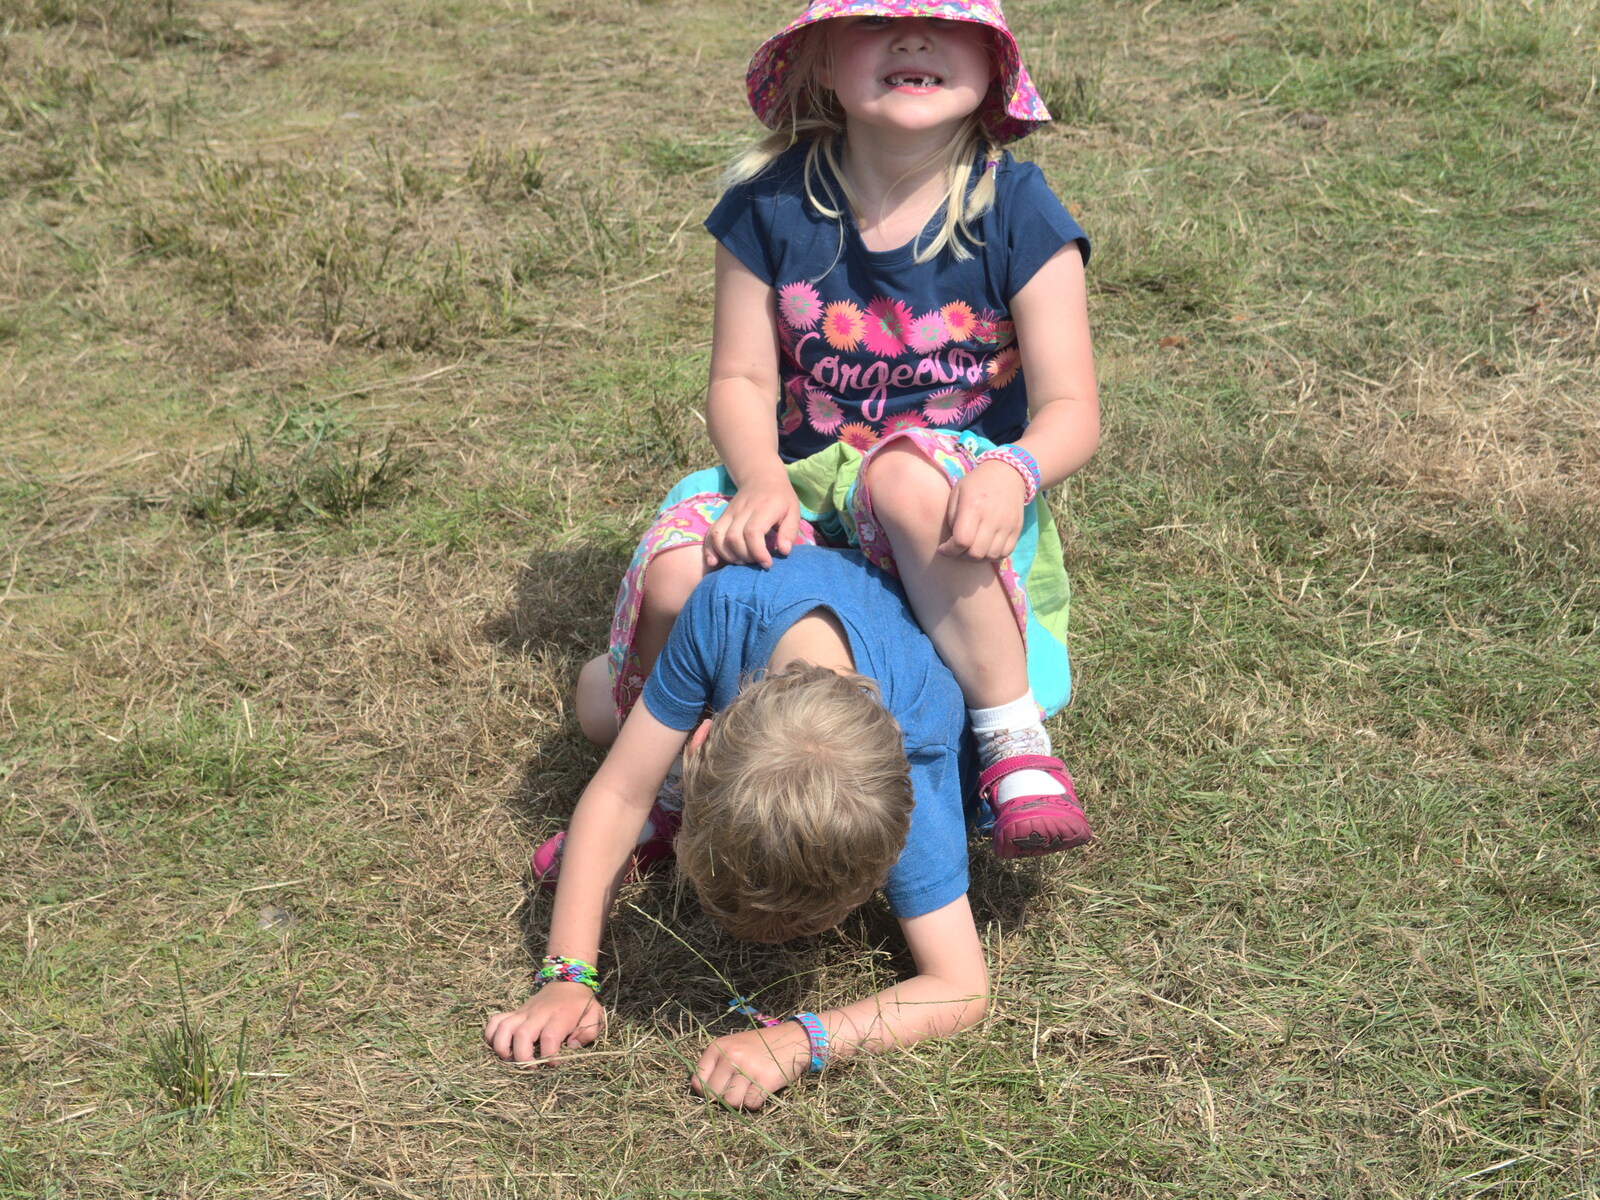 Fred's pinned to the ground from Latitude Festival, Henham Park, Southwold, Suffolk - 17th July 2014